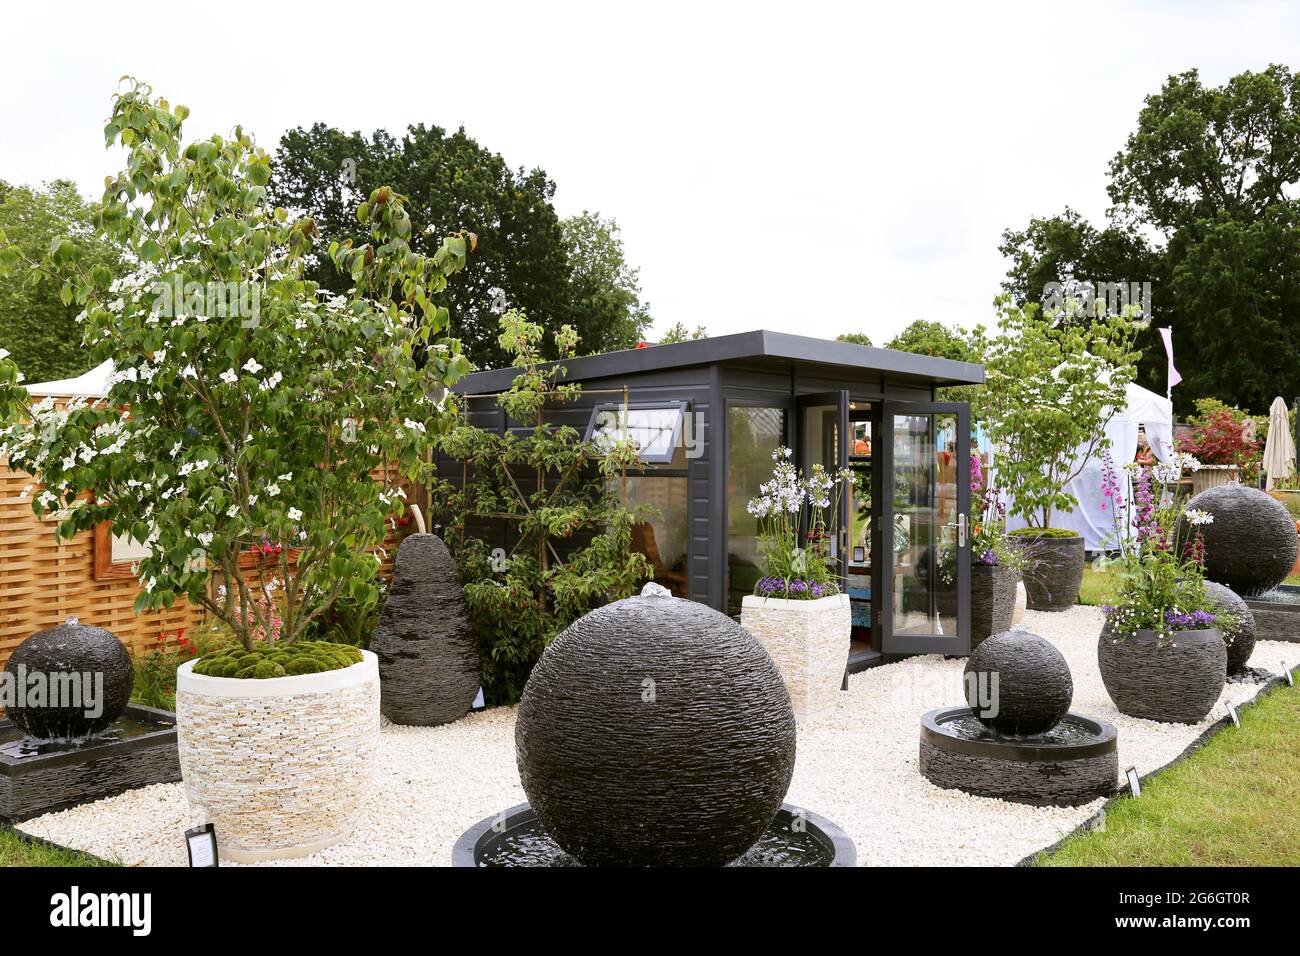 Tristan Cockerill Garden art, Trade Stand, RHS Hampton court Palace Garden Festival 2021, Preview Day, 5 juillet 2021, Londres, Angleterre, ROYAUME-UNI Banque D'Images